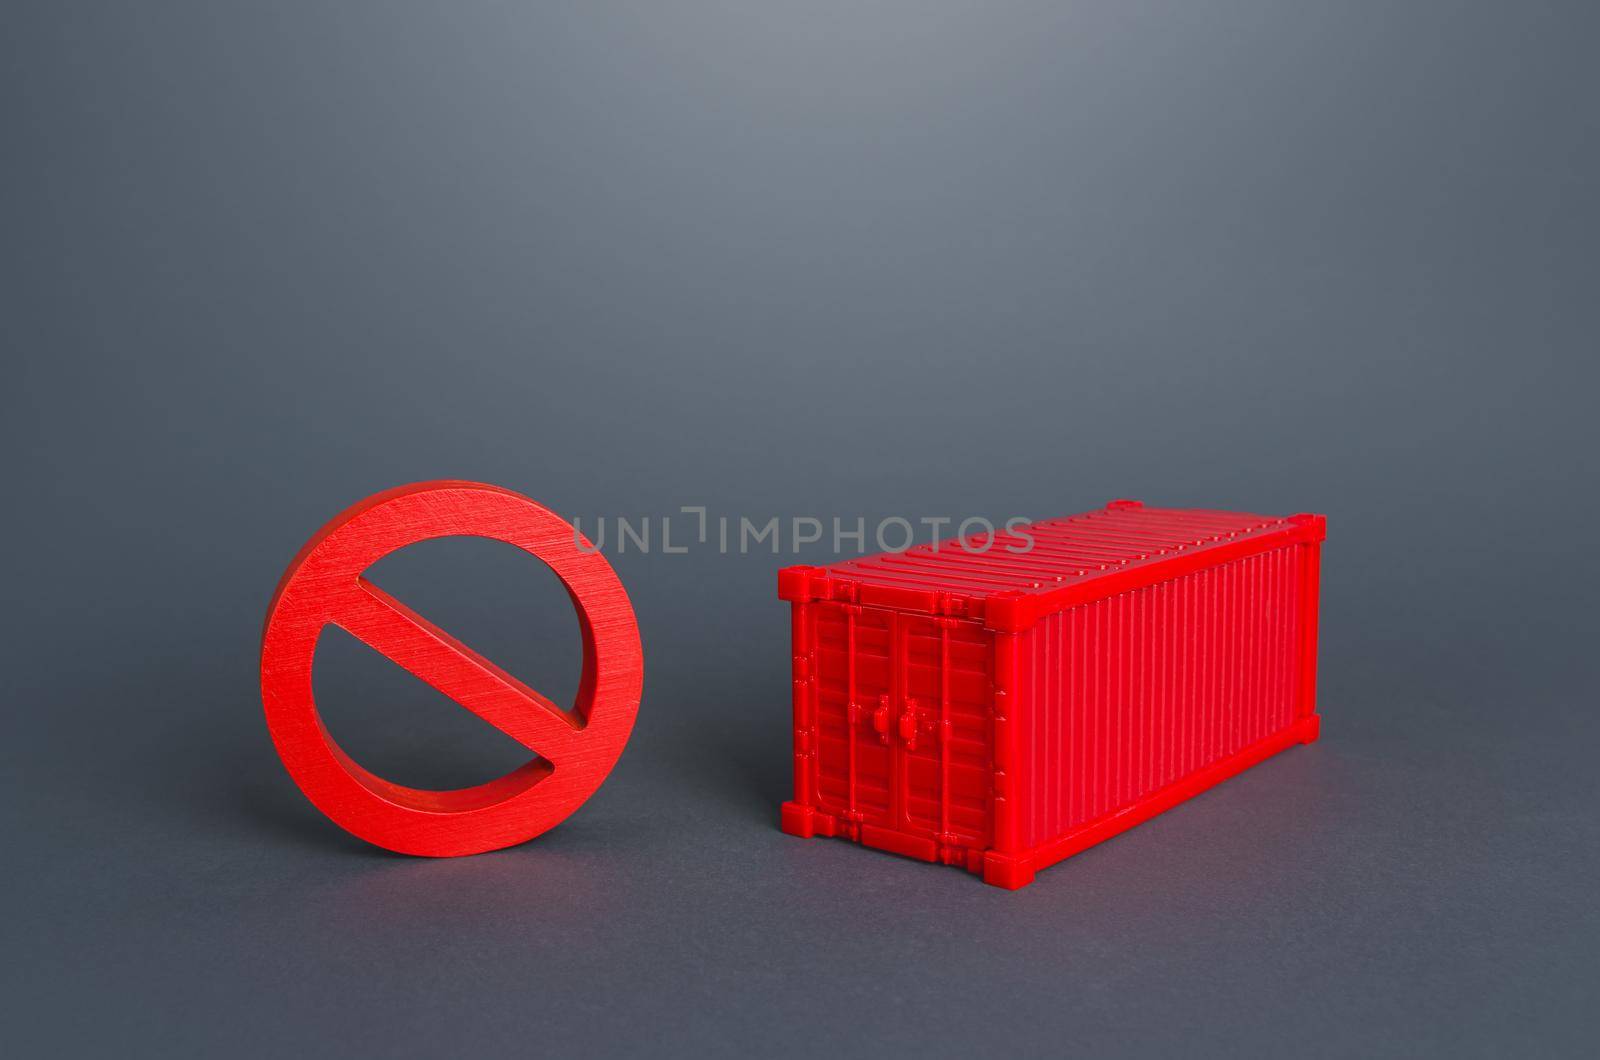 Red container and NO prohibition sign. Logistic crisis in cargo transportation by sea. Shipping container shortage concept. Imbalance in global trade. Impossibility of exporting goods from Asia.